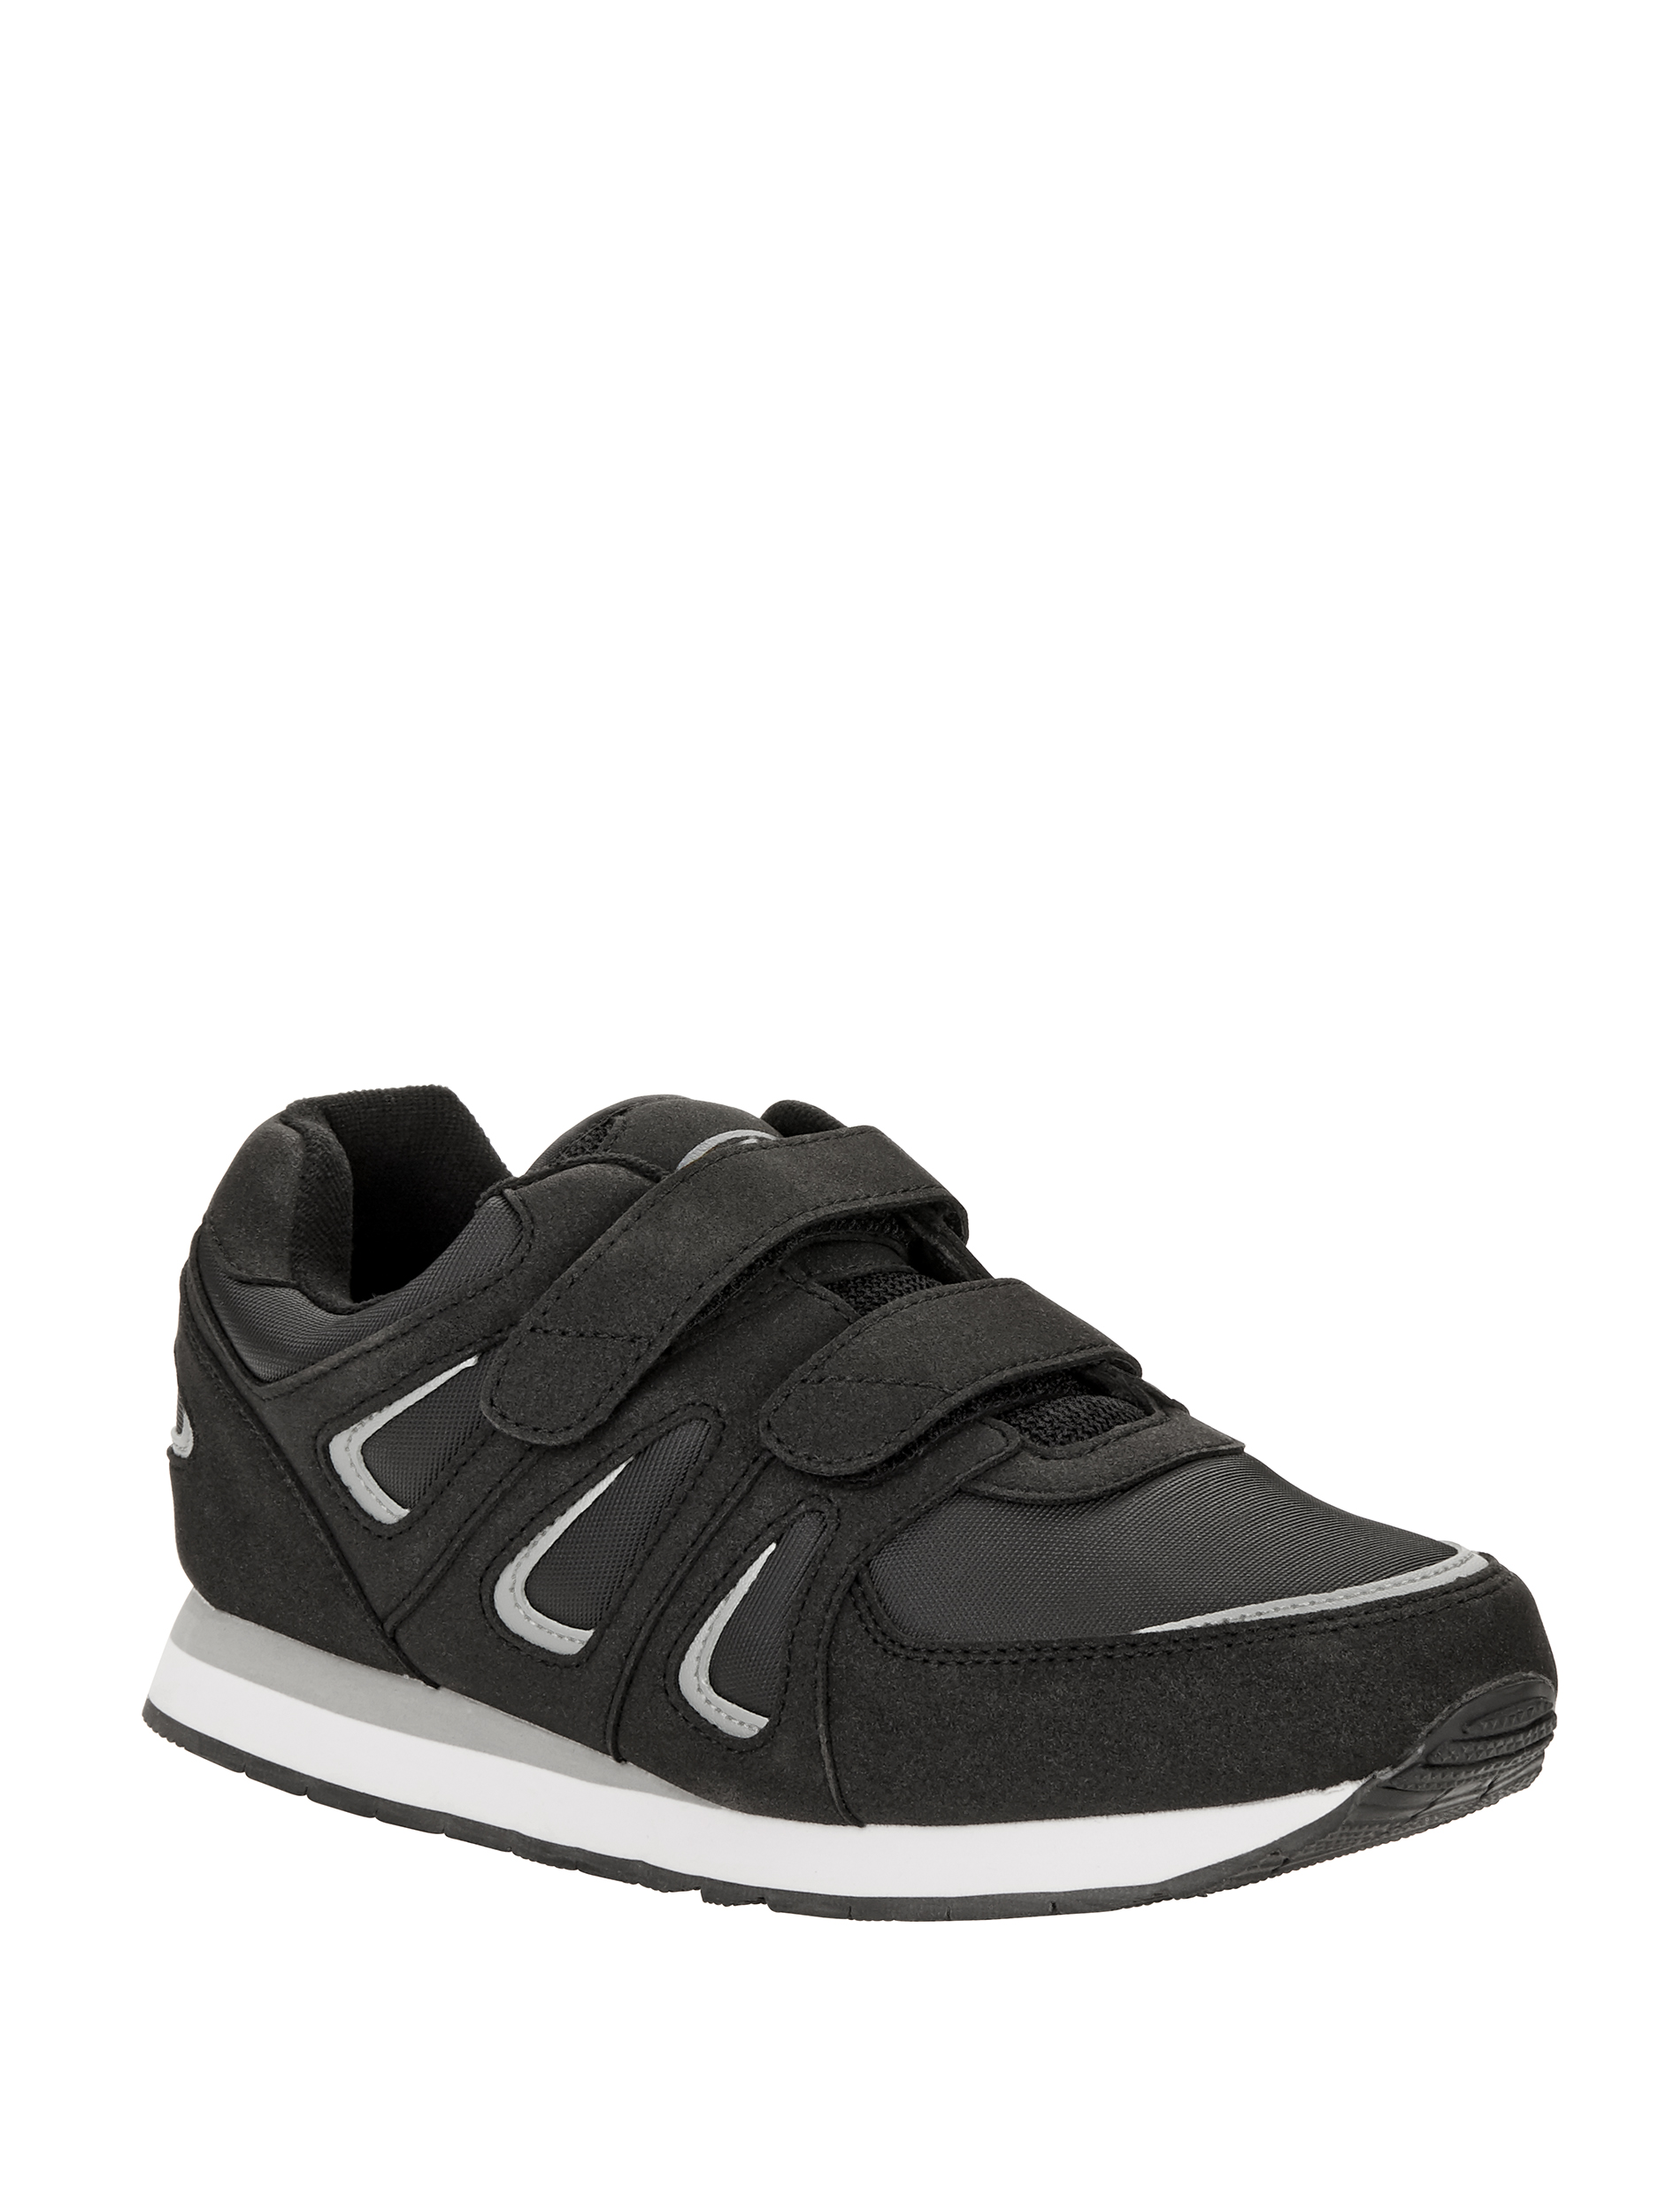 Athletic Works Men's Silver Series Athletic Shoe - image 1 of 7